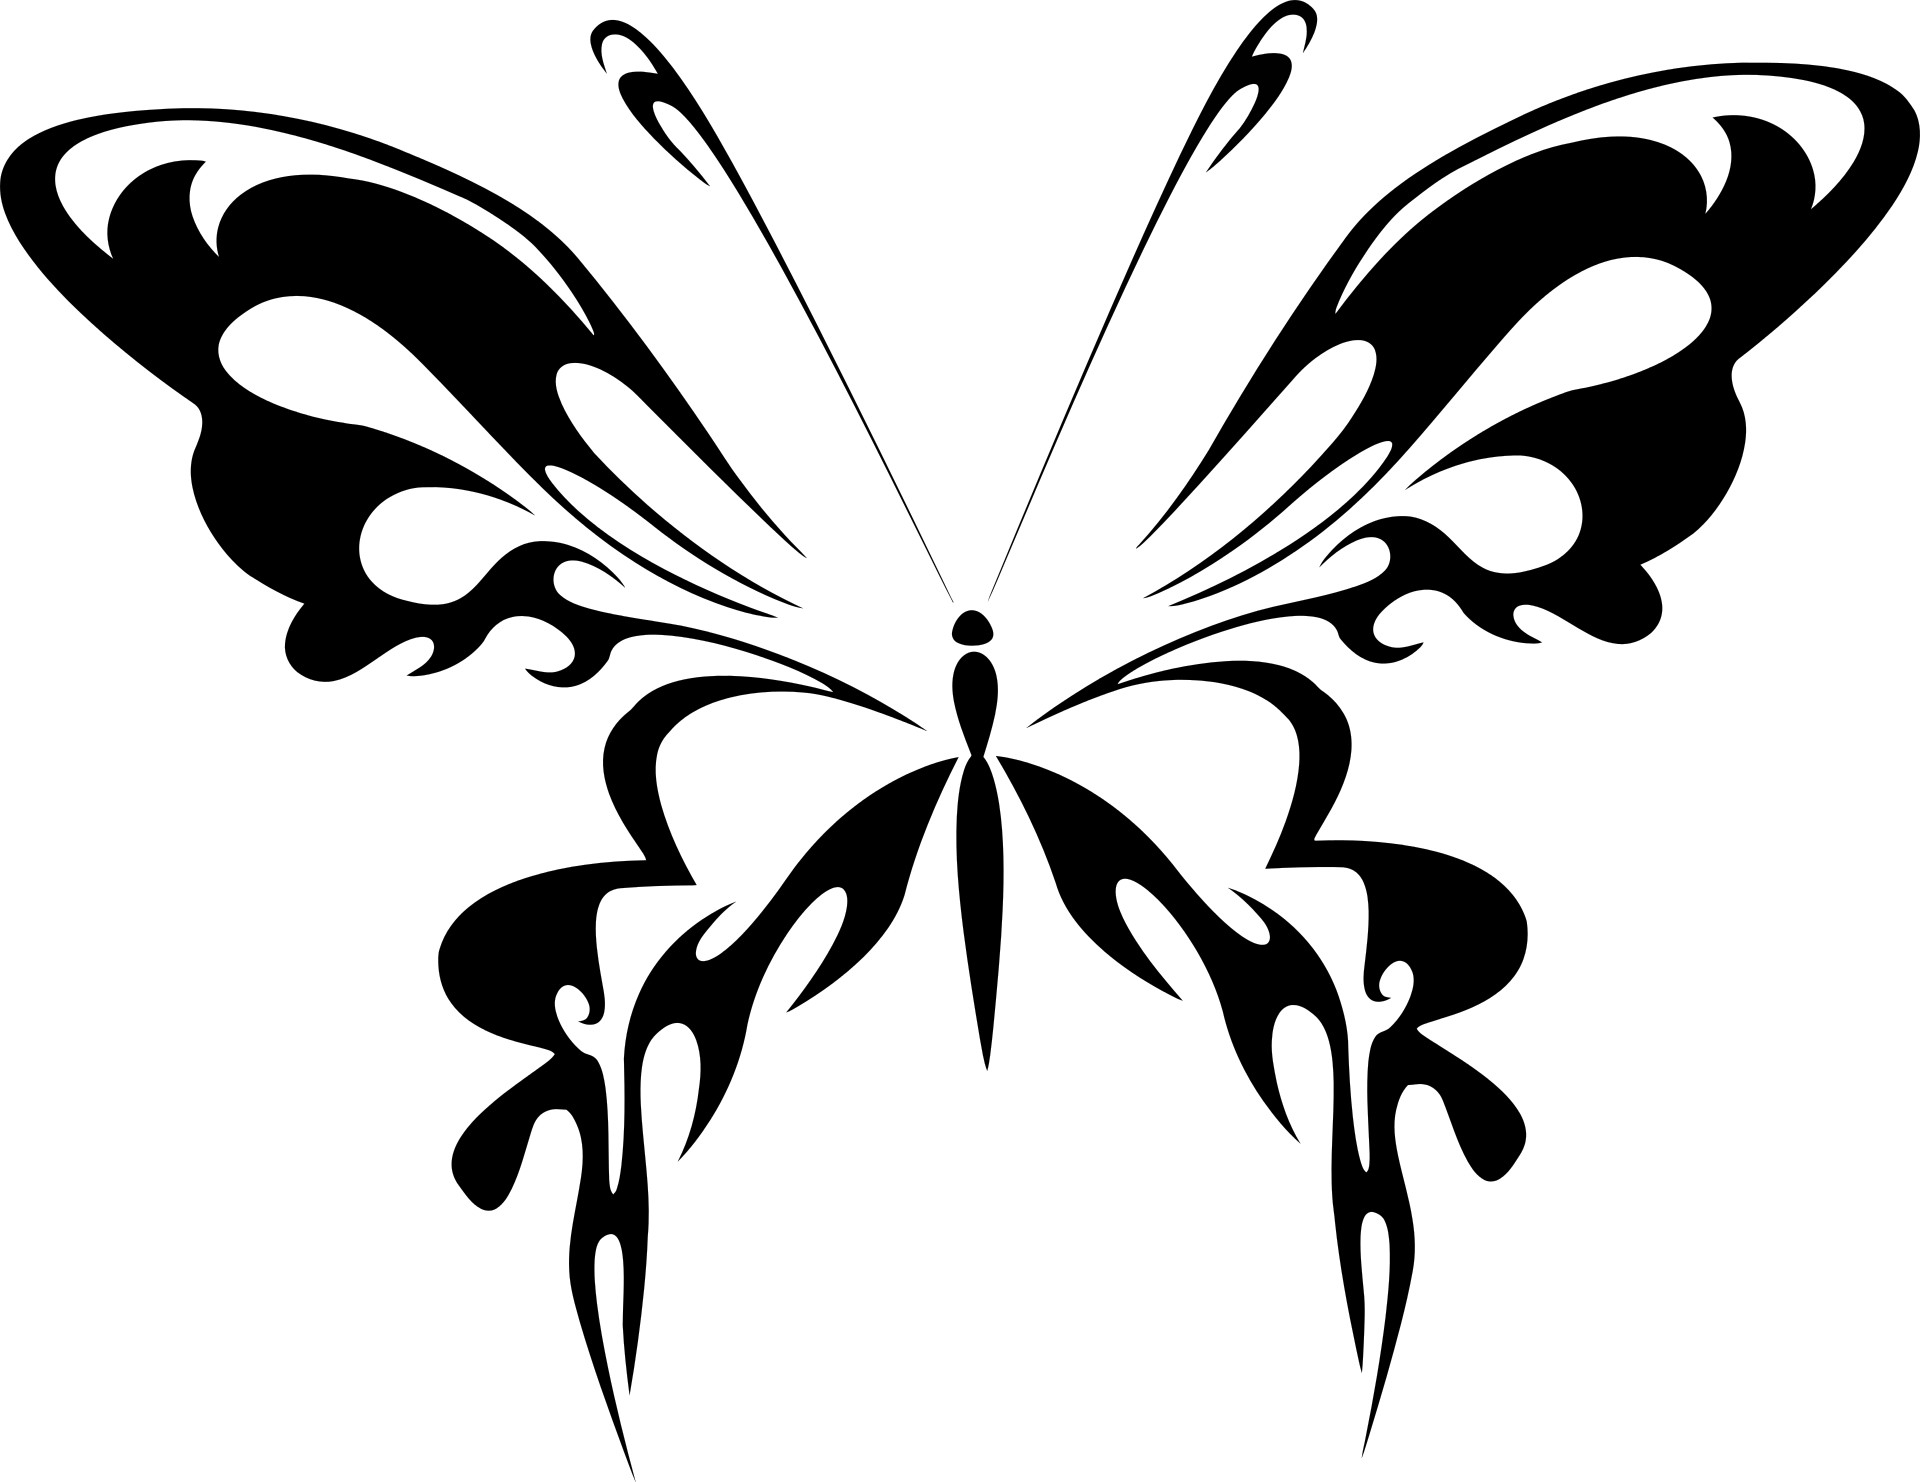 Black Silhouette Of A Butterfly On A White Background - Black And White  Butterfly Png - 1920x1482 Wallpaper 